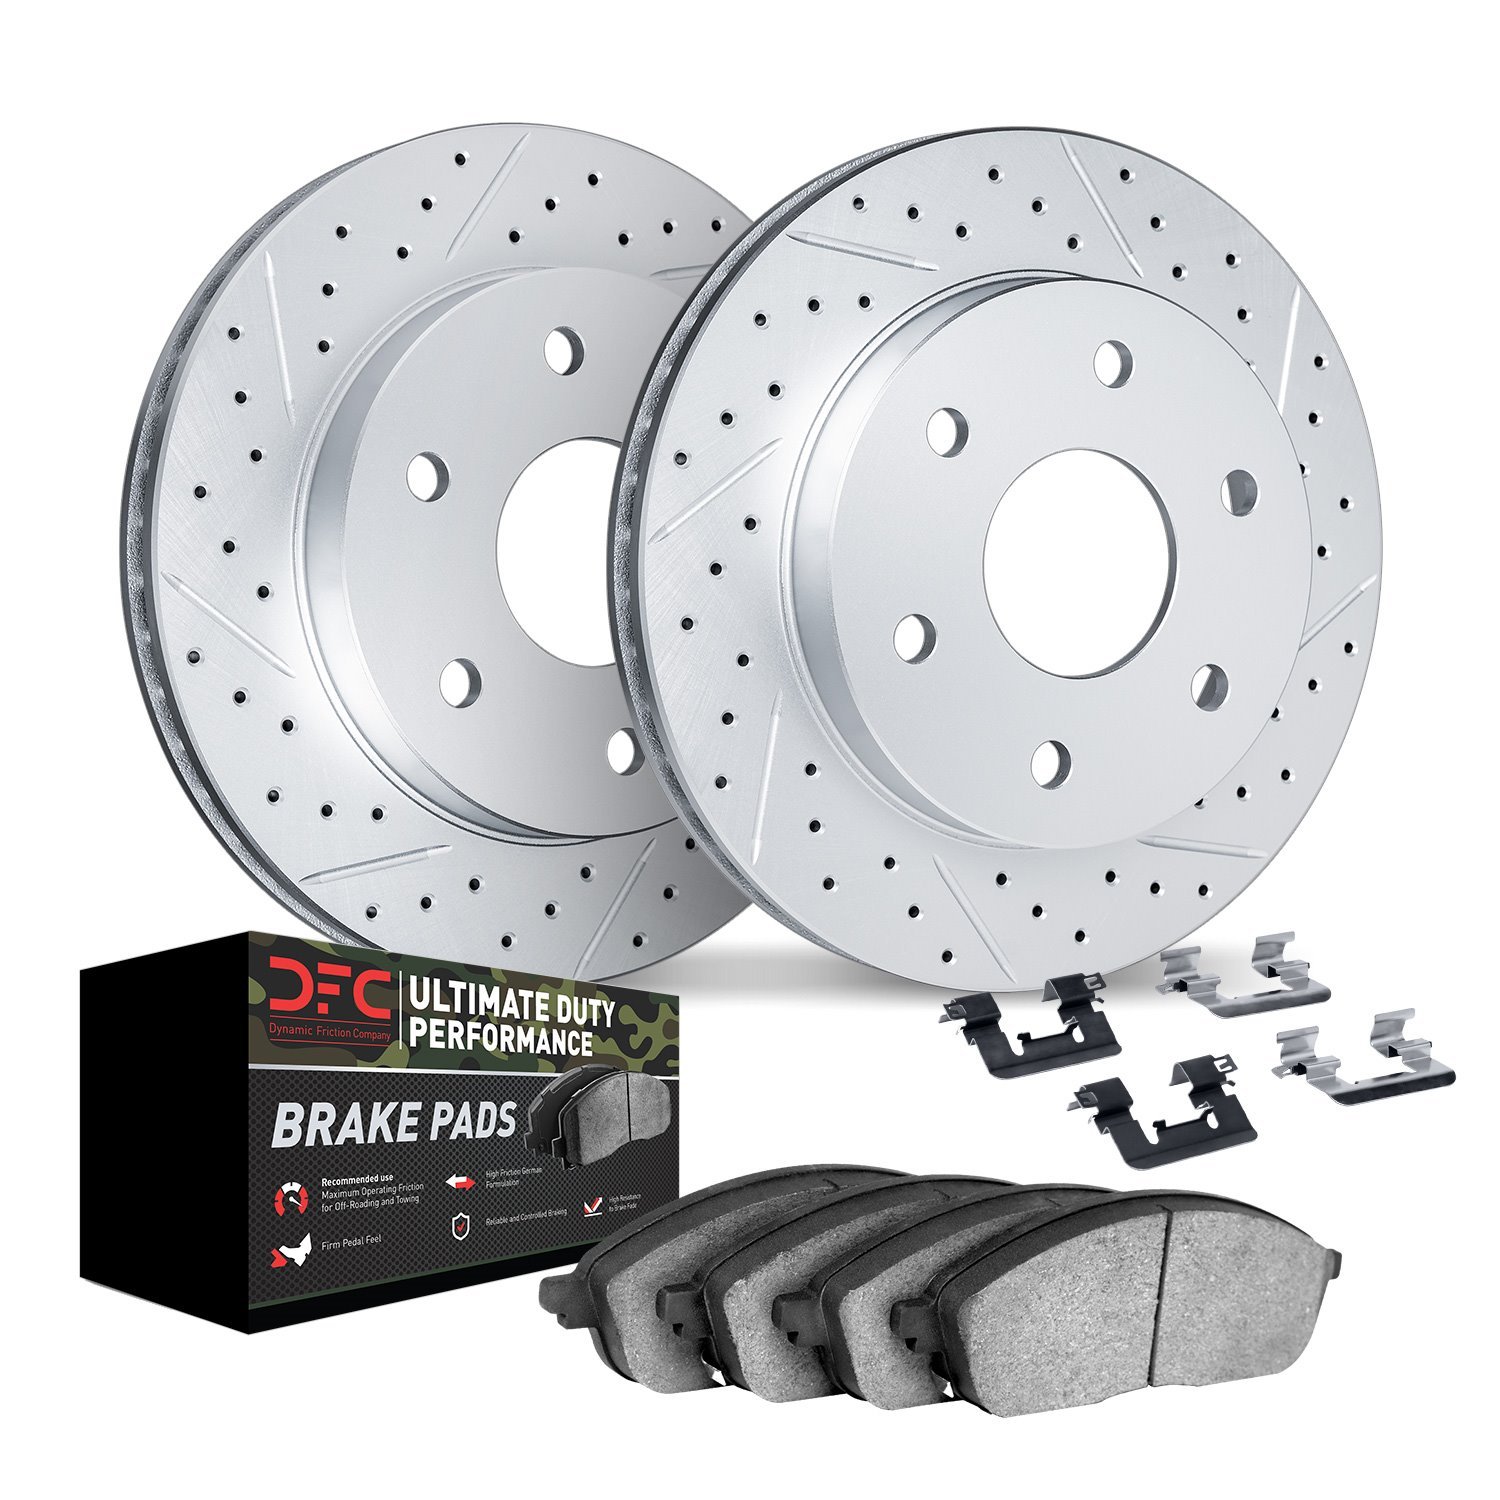 2412-54048 Geoperformance Drilled/Slotted Brake Rotors with Ultimate-Duty Brake Pads Kit & Hardware, 2004-2008 Ford/Lincoln/Merc